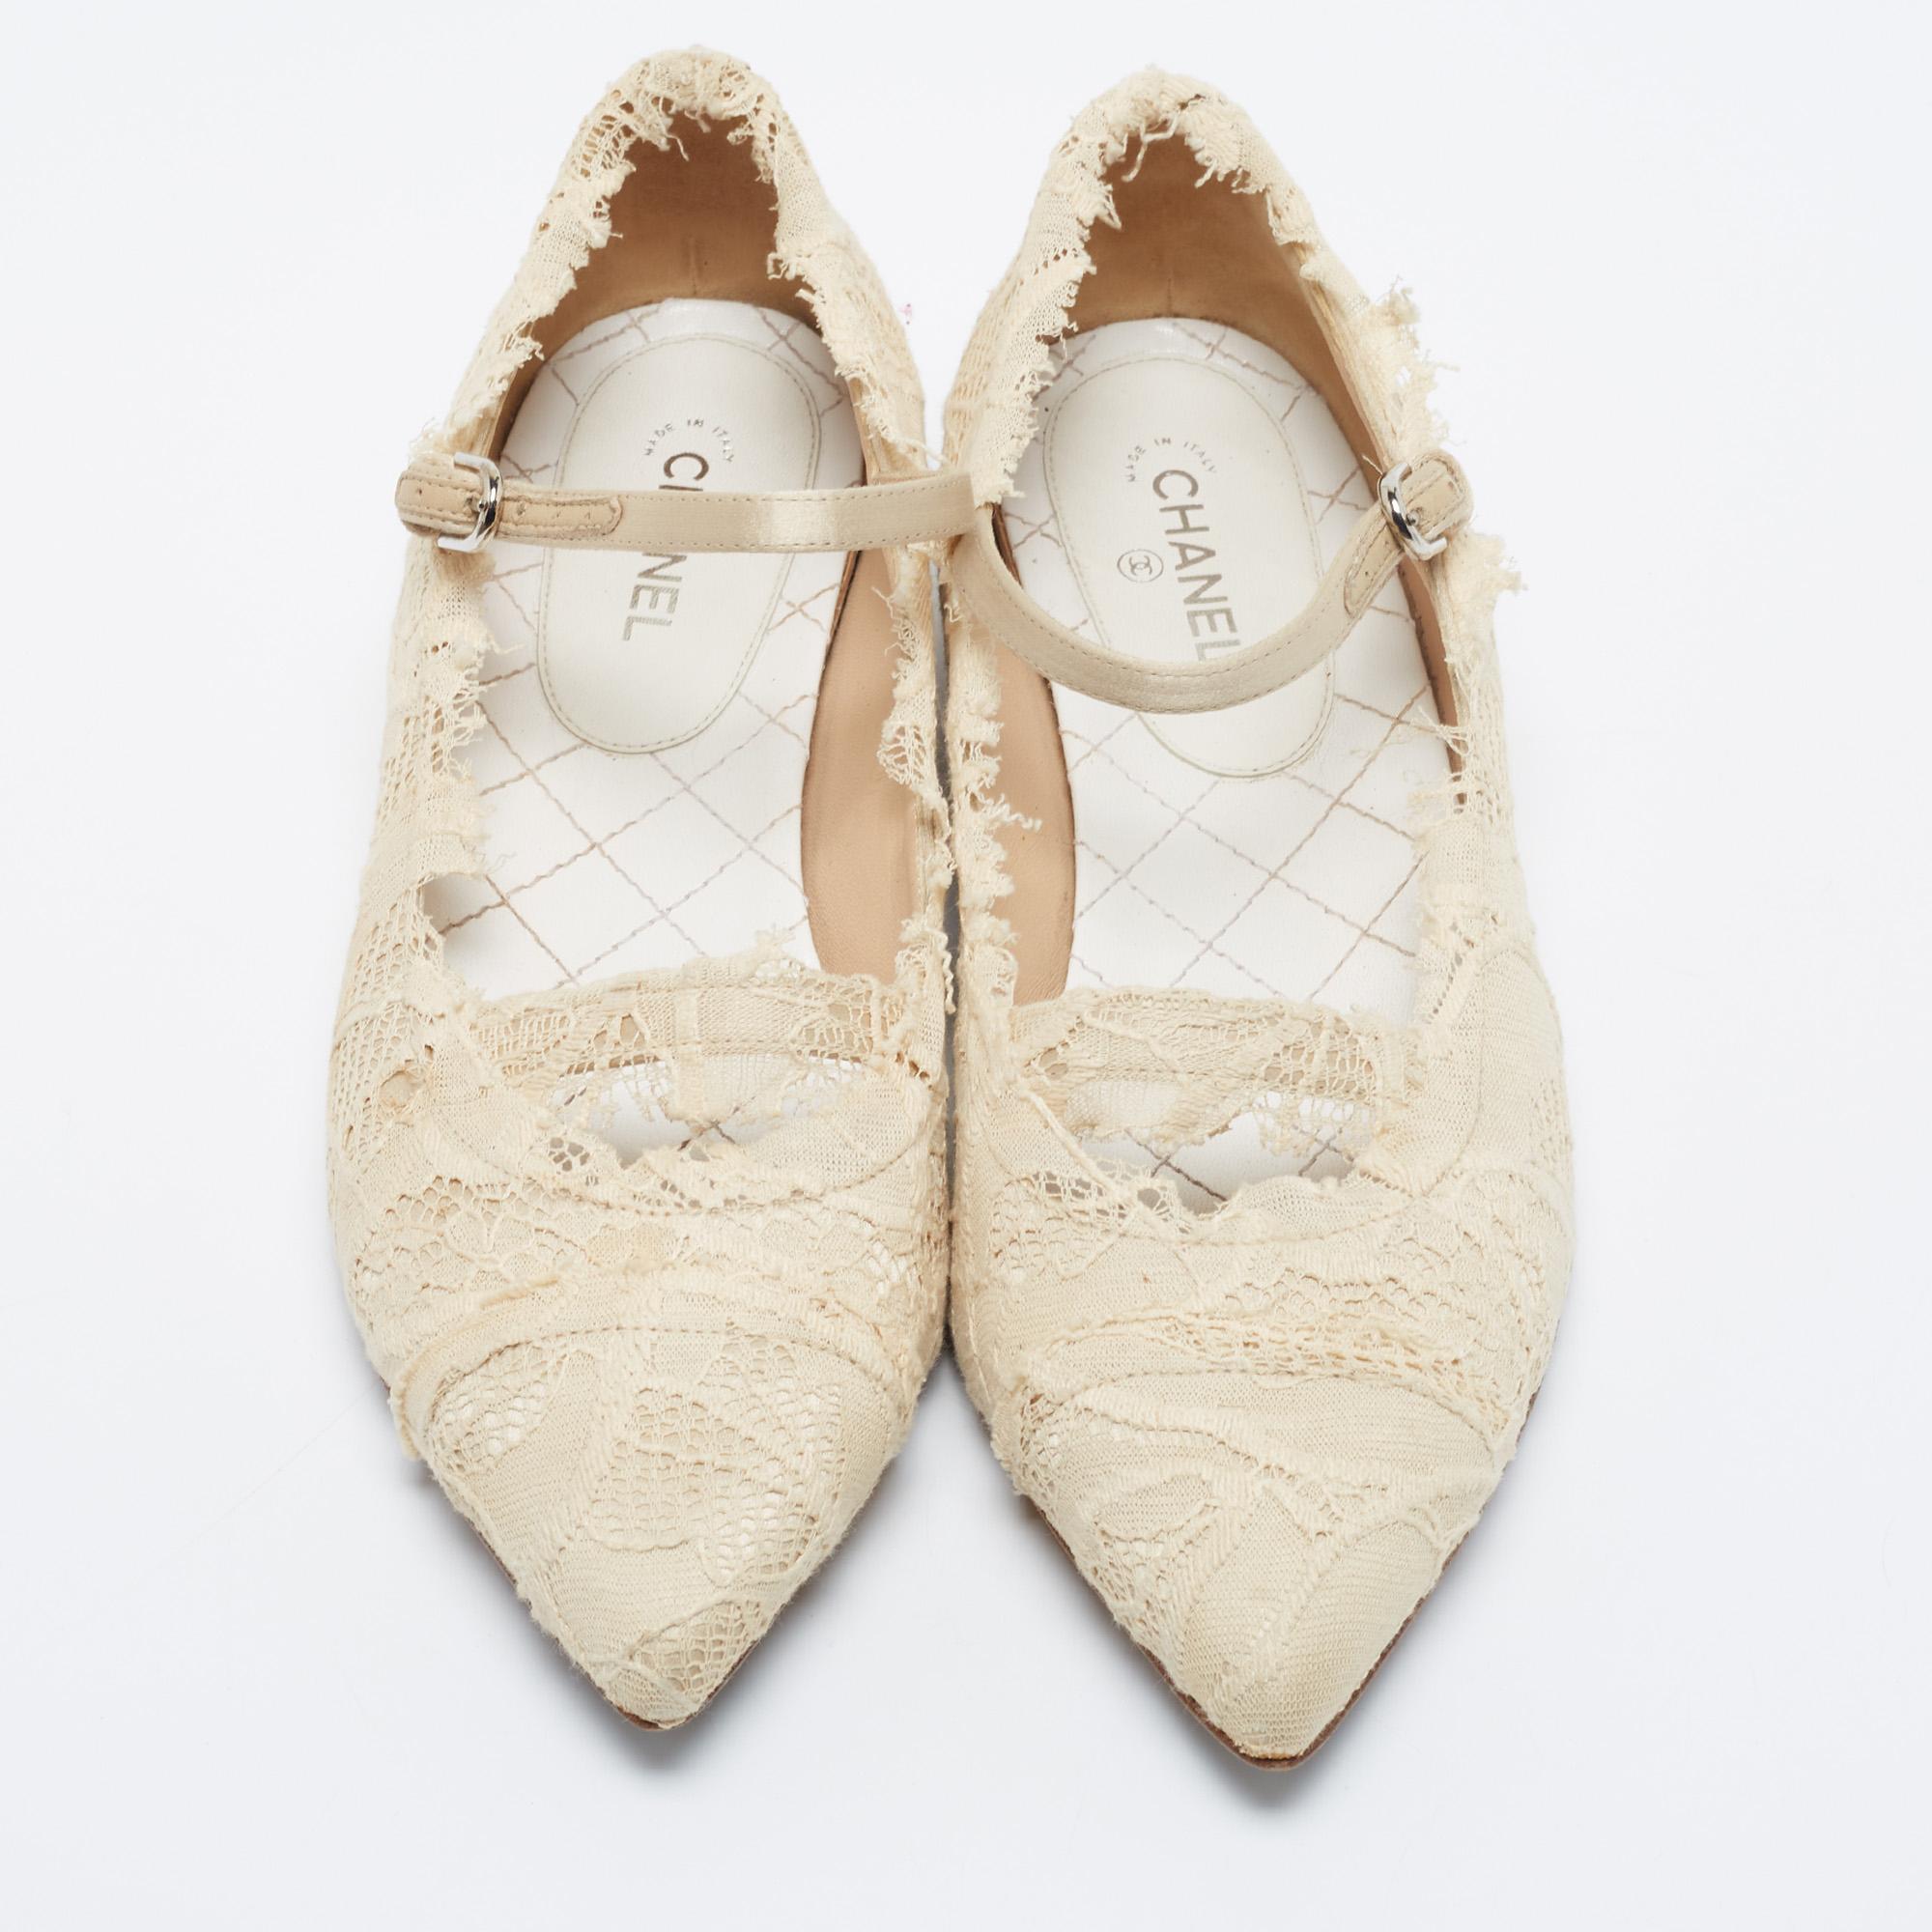 Owing to the versatility of these Chanel flats, you will find yourself reaching out to them more often. They are decorated with attractive lace detailing and the ankle buckle closure and the low heels lend this pair a functional finish.

